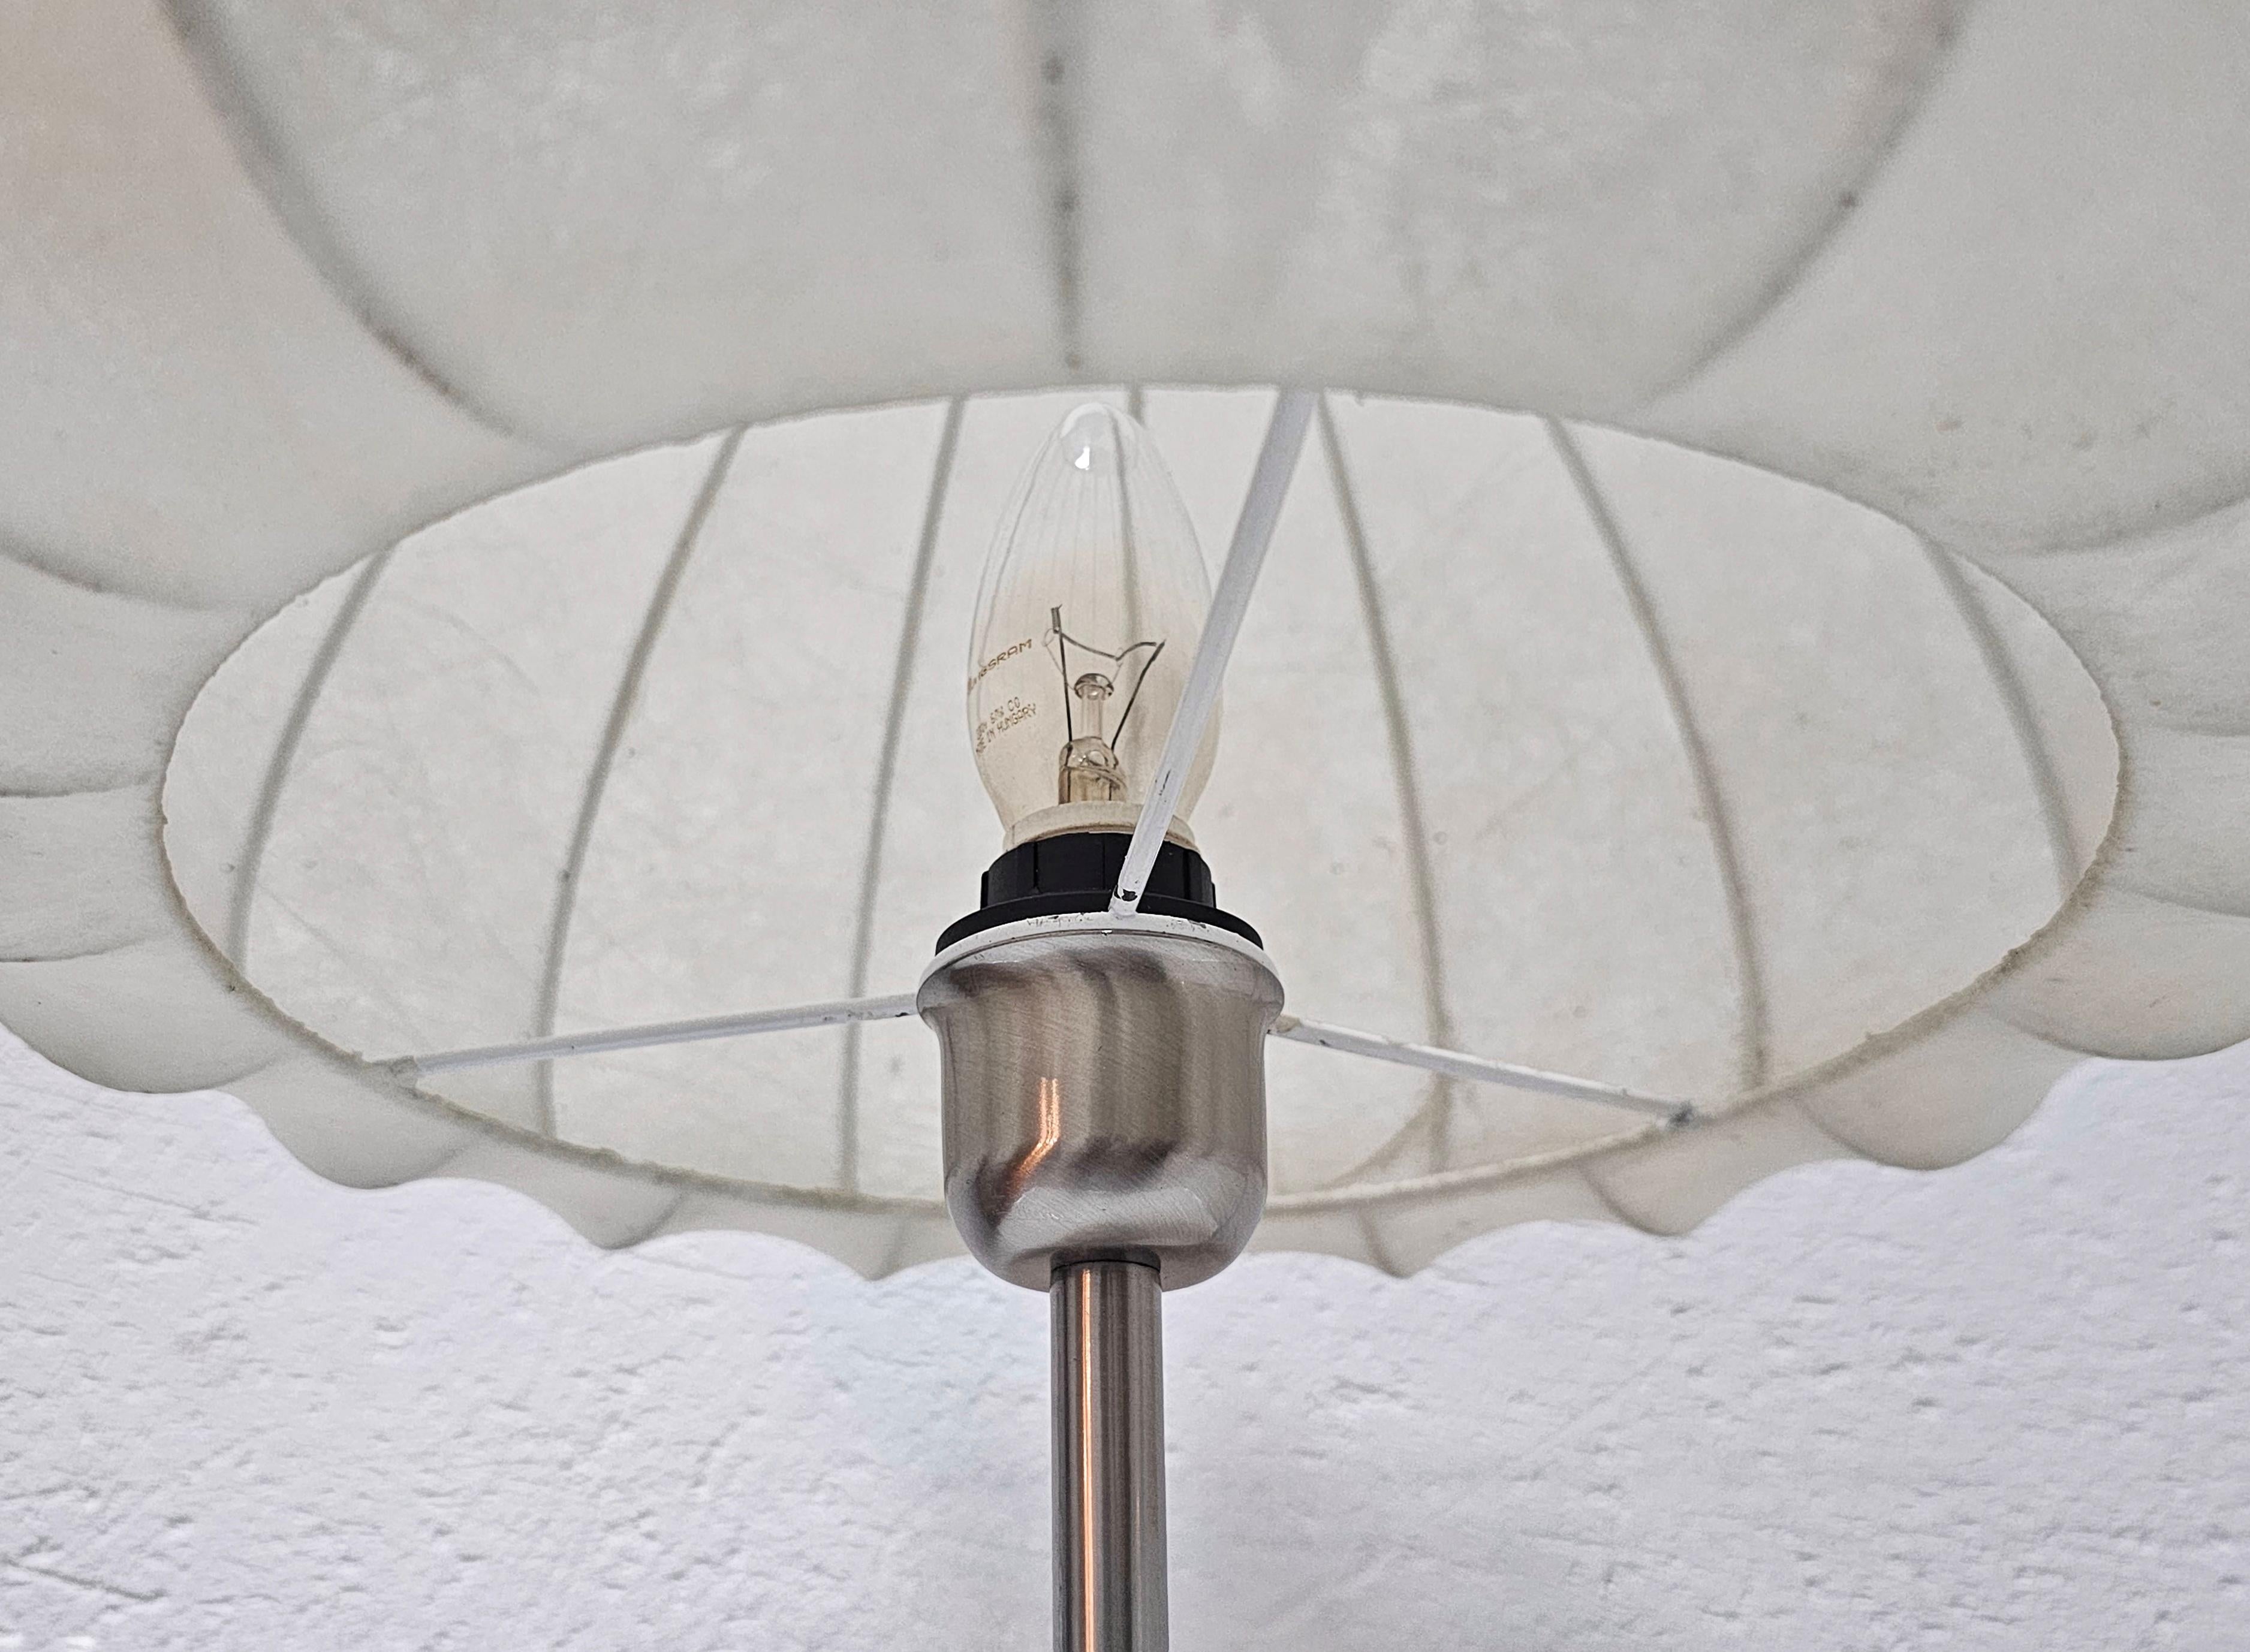 Mid Century Modern Cocoon Table Lamp in style of Achille Castiglioni, Italy 1970 For Sale 4